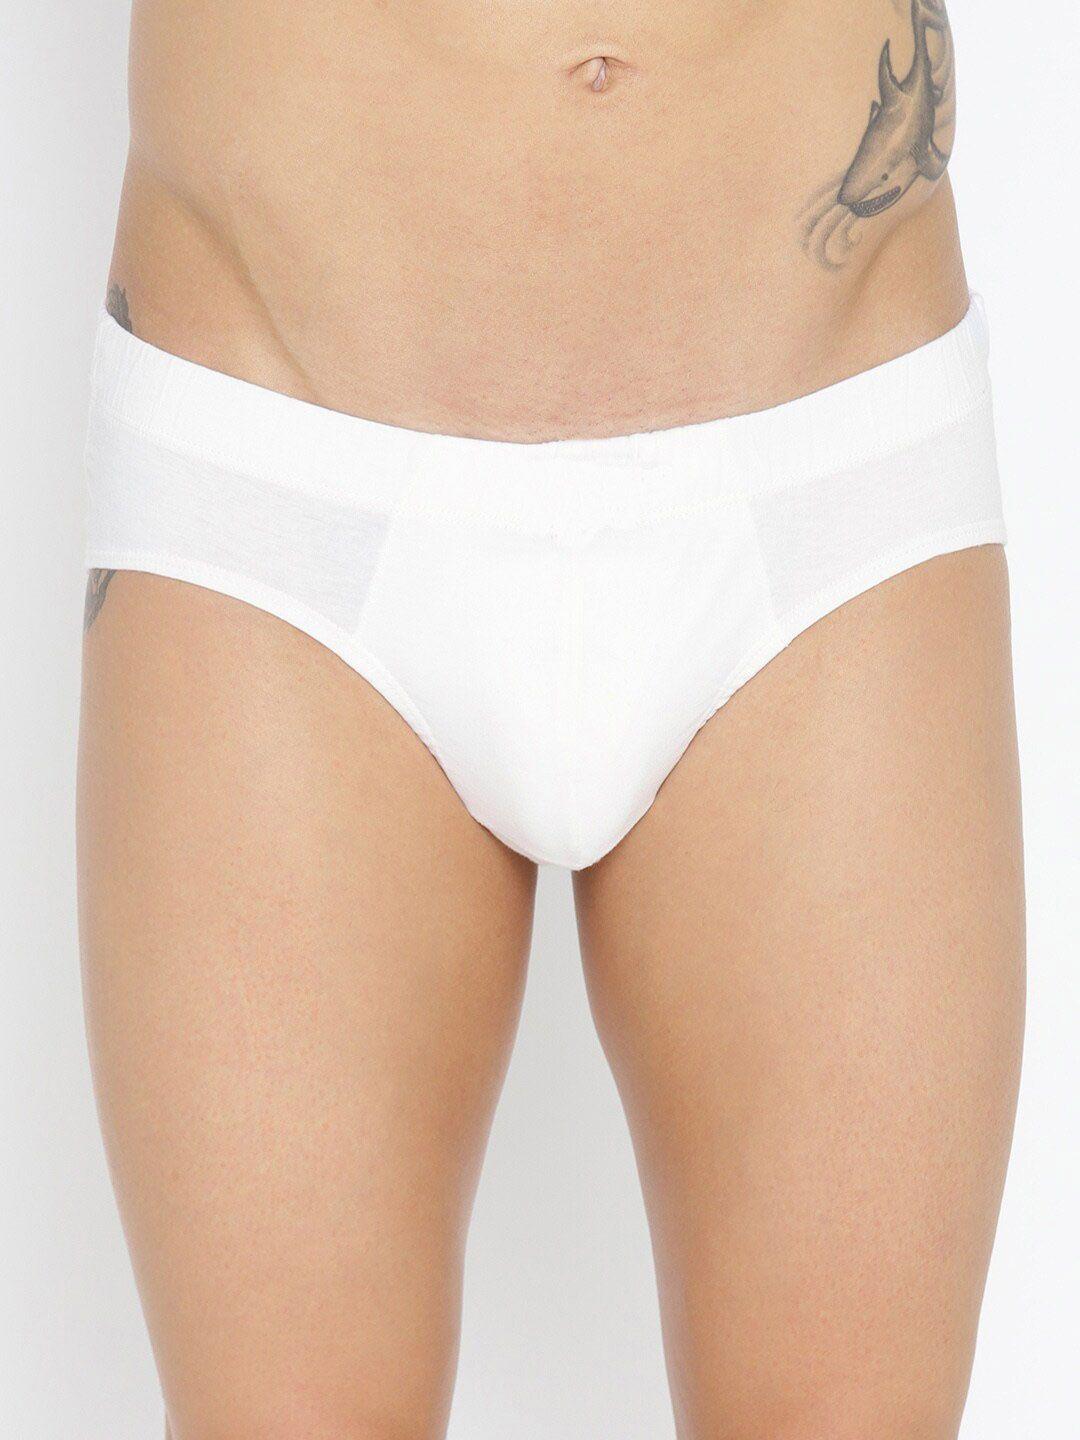 the roadster lifestyle co. white mid-rise pure cotton basic briefs rbie-1003-wh-1